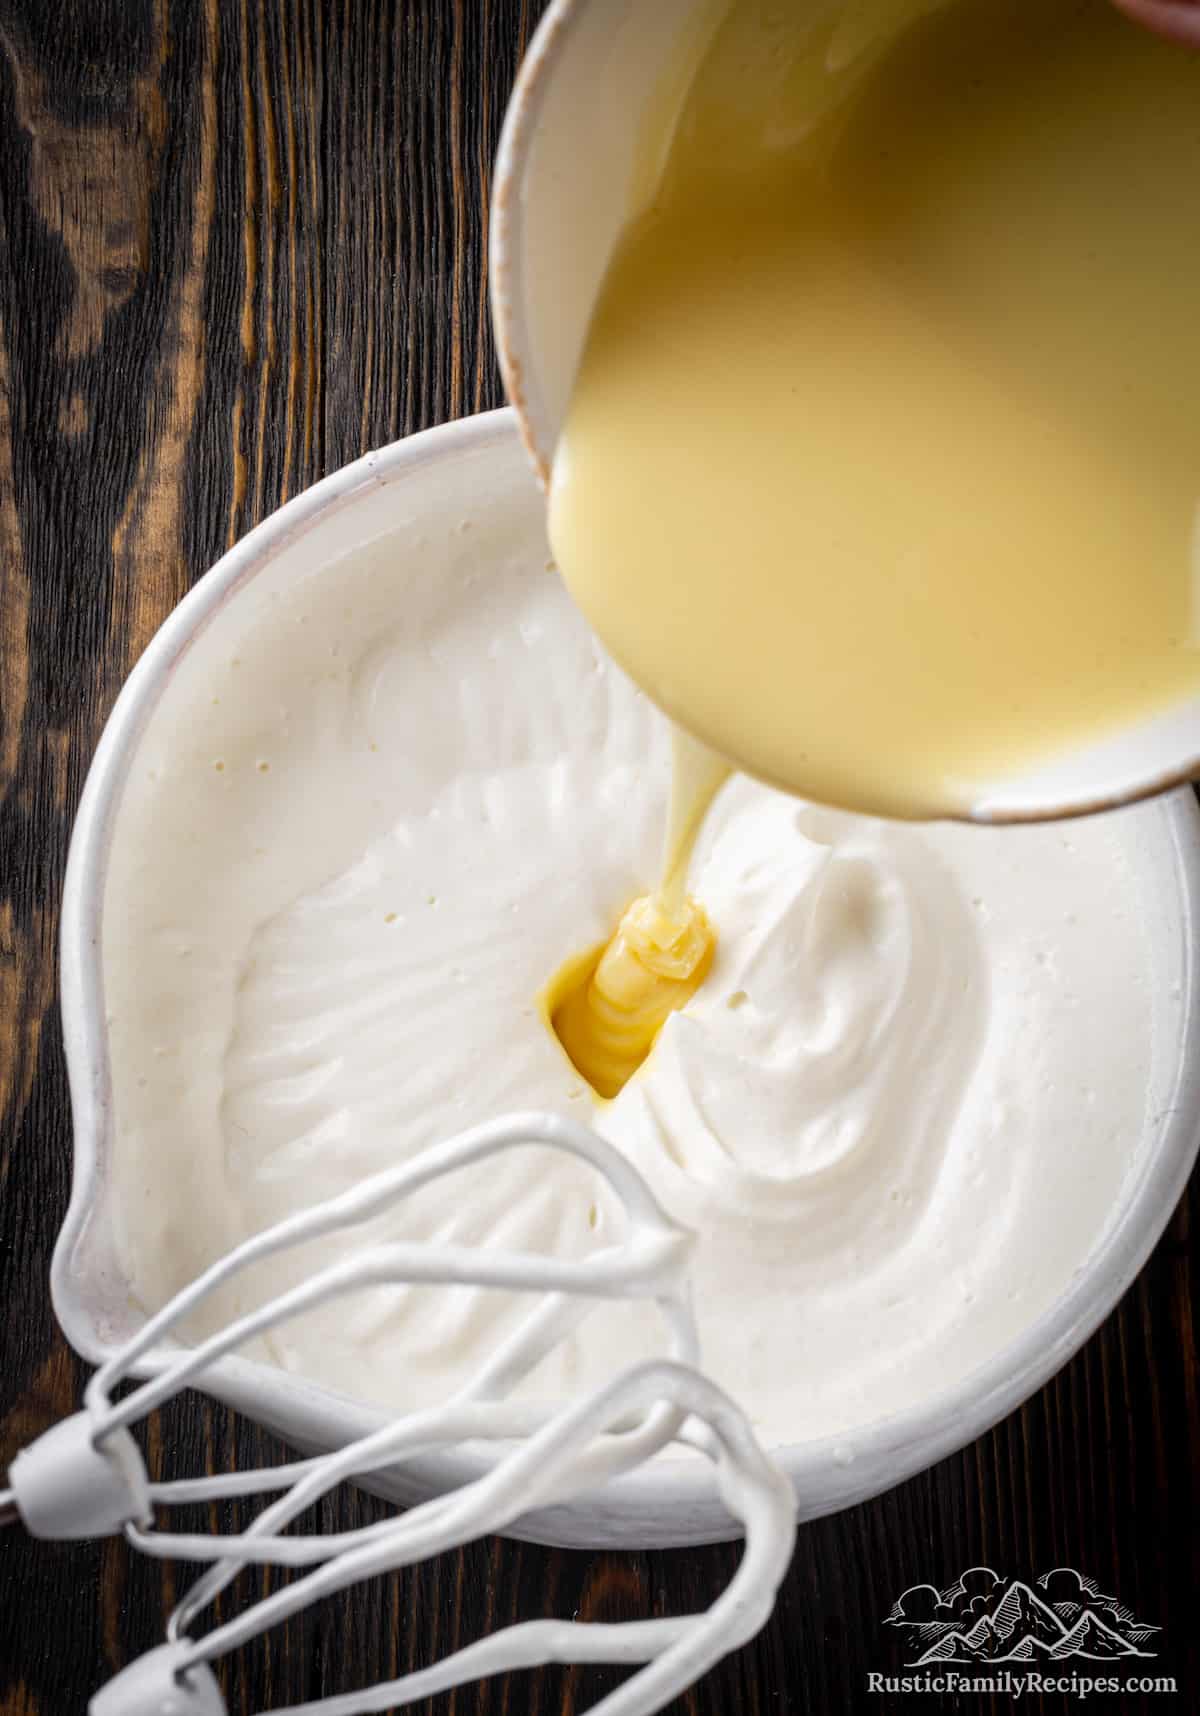 Condensed milk is poured into a bowl of whipped cream, next to a mixer's whisk attachment.